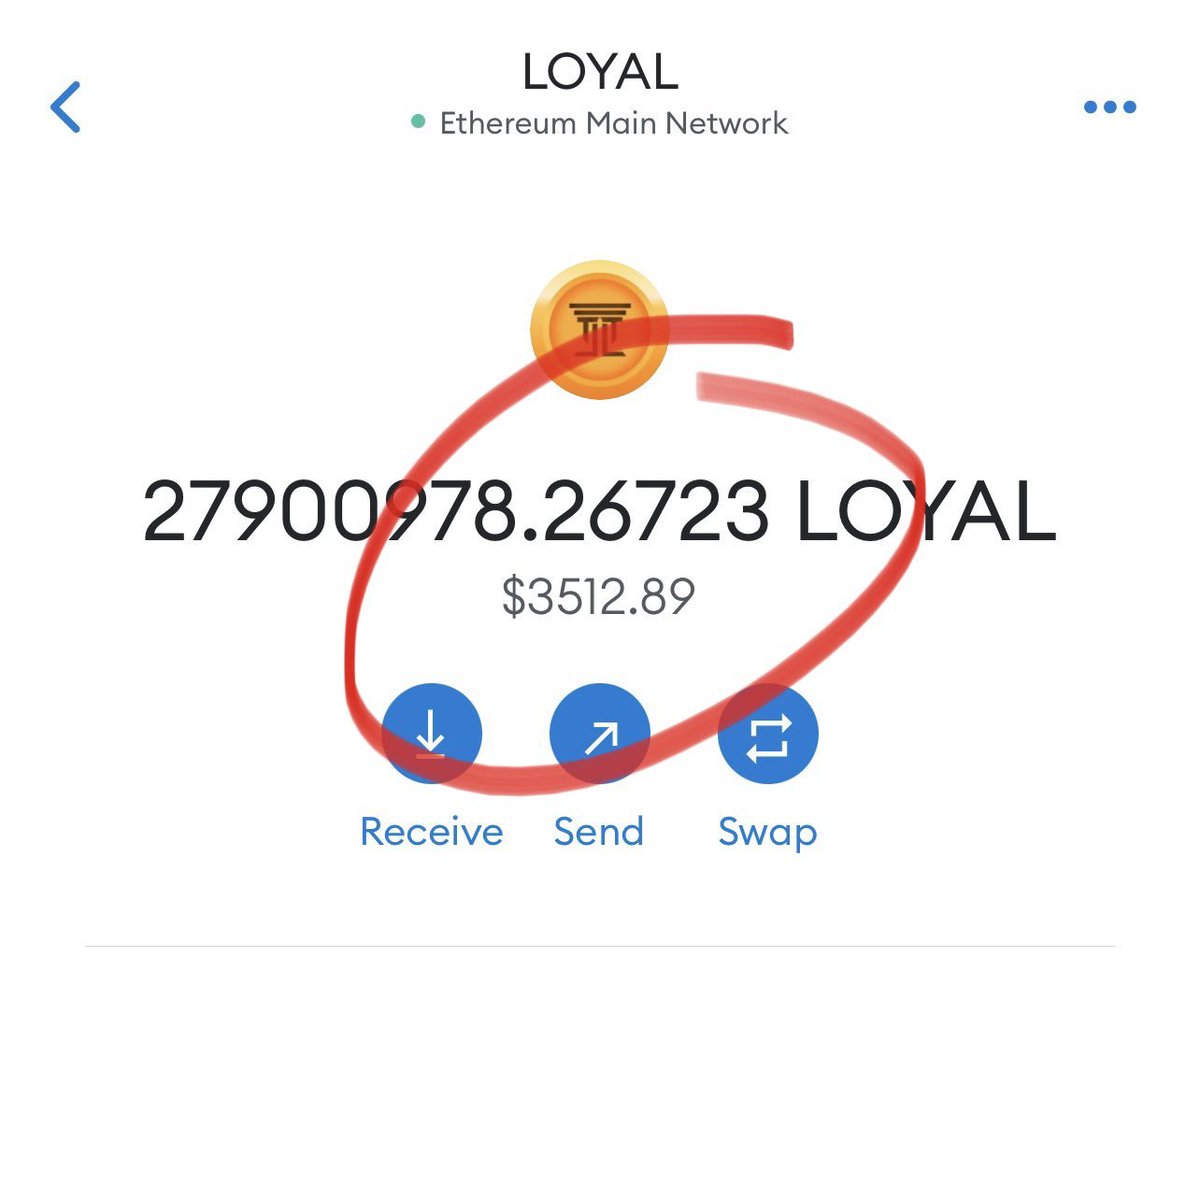 LISTEN UP WEB3. 👹

THE $LOYAL AIRDROP IS NOW LIVE, WAITING TO BE CLAIMED.

🔗 loyalty.holdings

#WWDC23 #cryptocurrency #Oculus #REFUND $MONG $LINK #4TOKEN #binance #memecoin $LTC #LOYAL $PEPE $MATIC $PSYOP #MATIC $FINALE $BEN #BEN #HODL $FLOKI $SUI $HEX